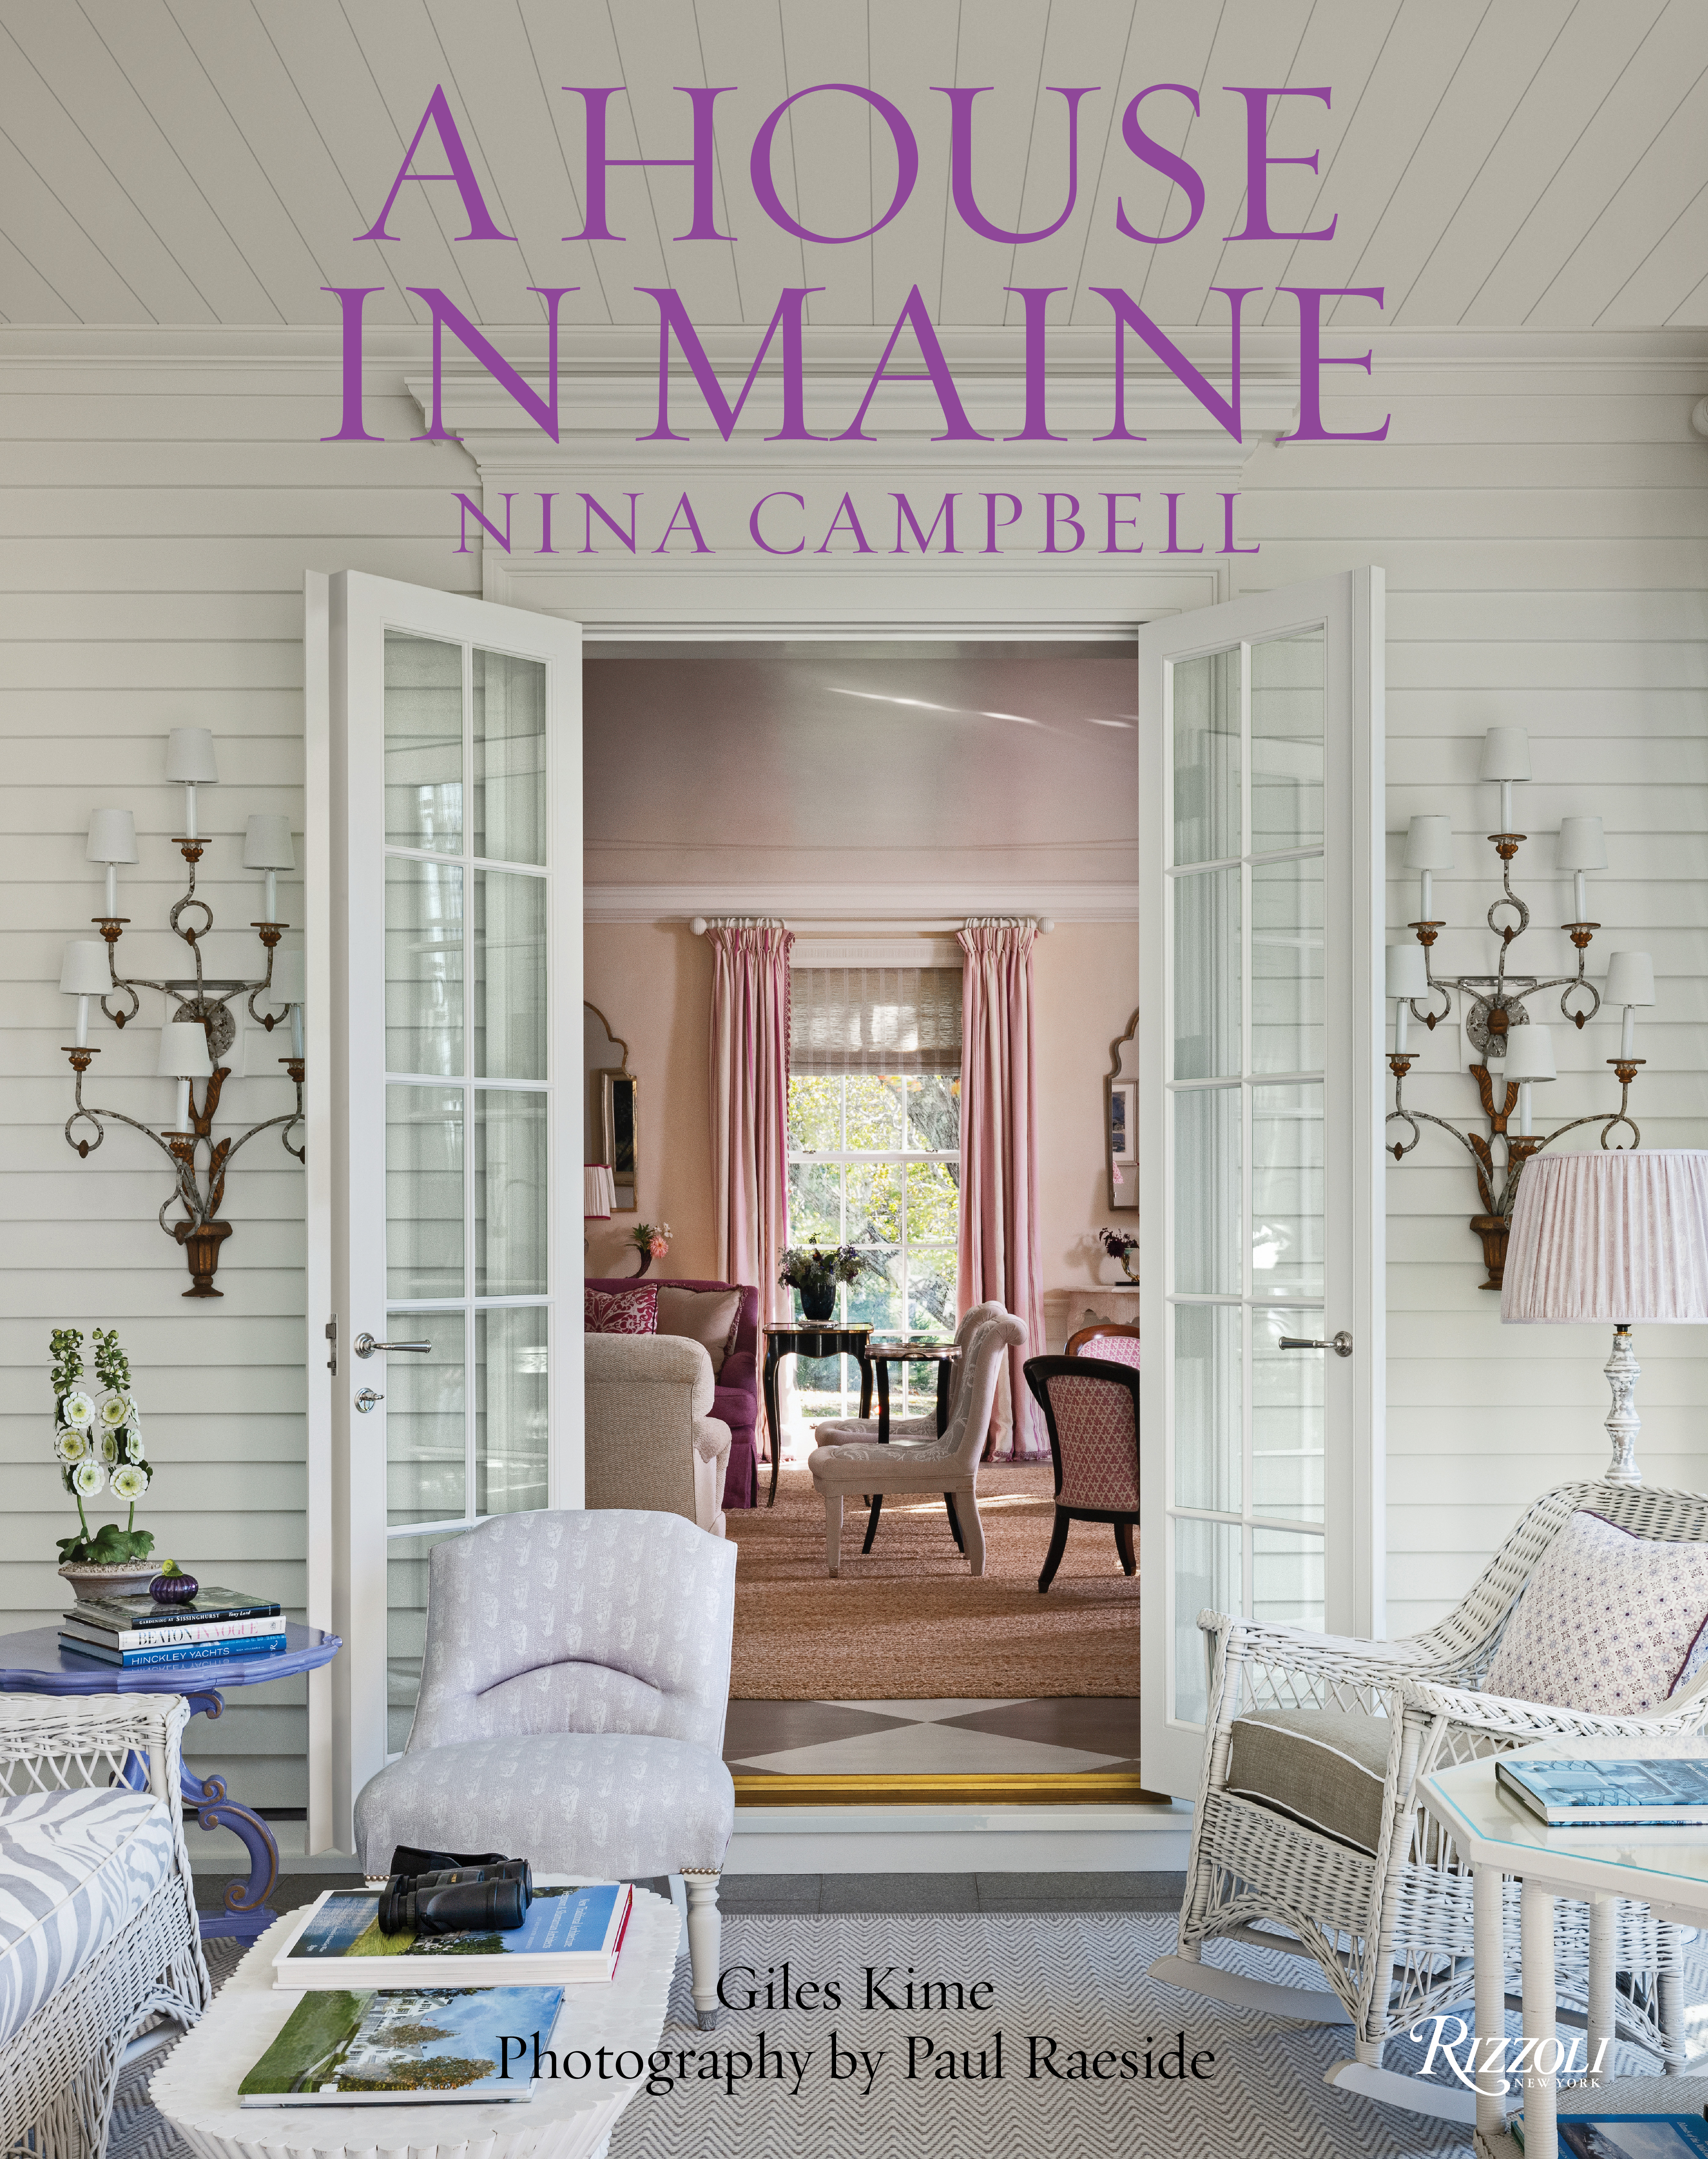 A House in Maine, published by Rizzoli